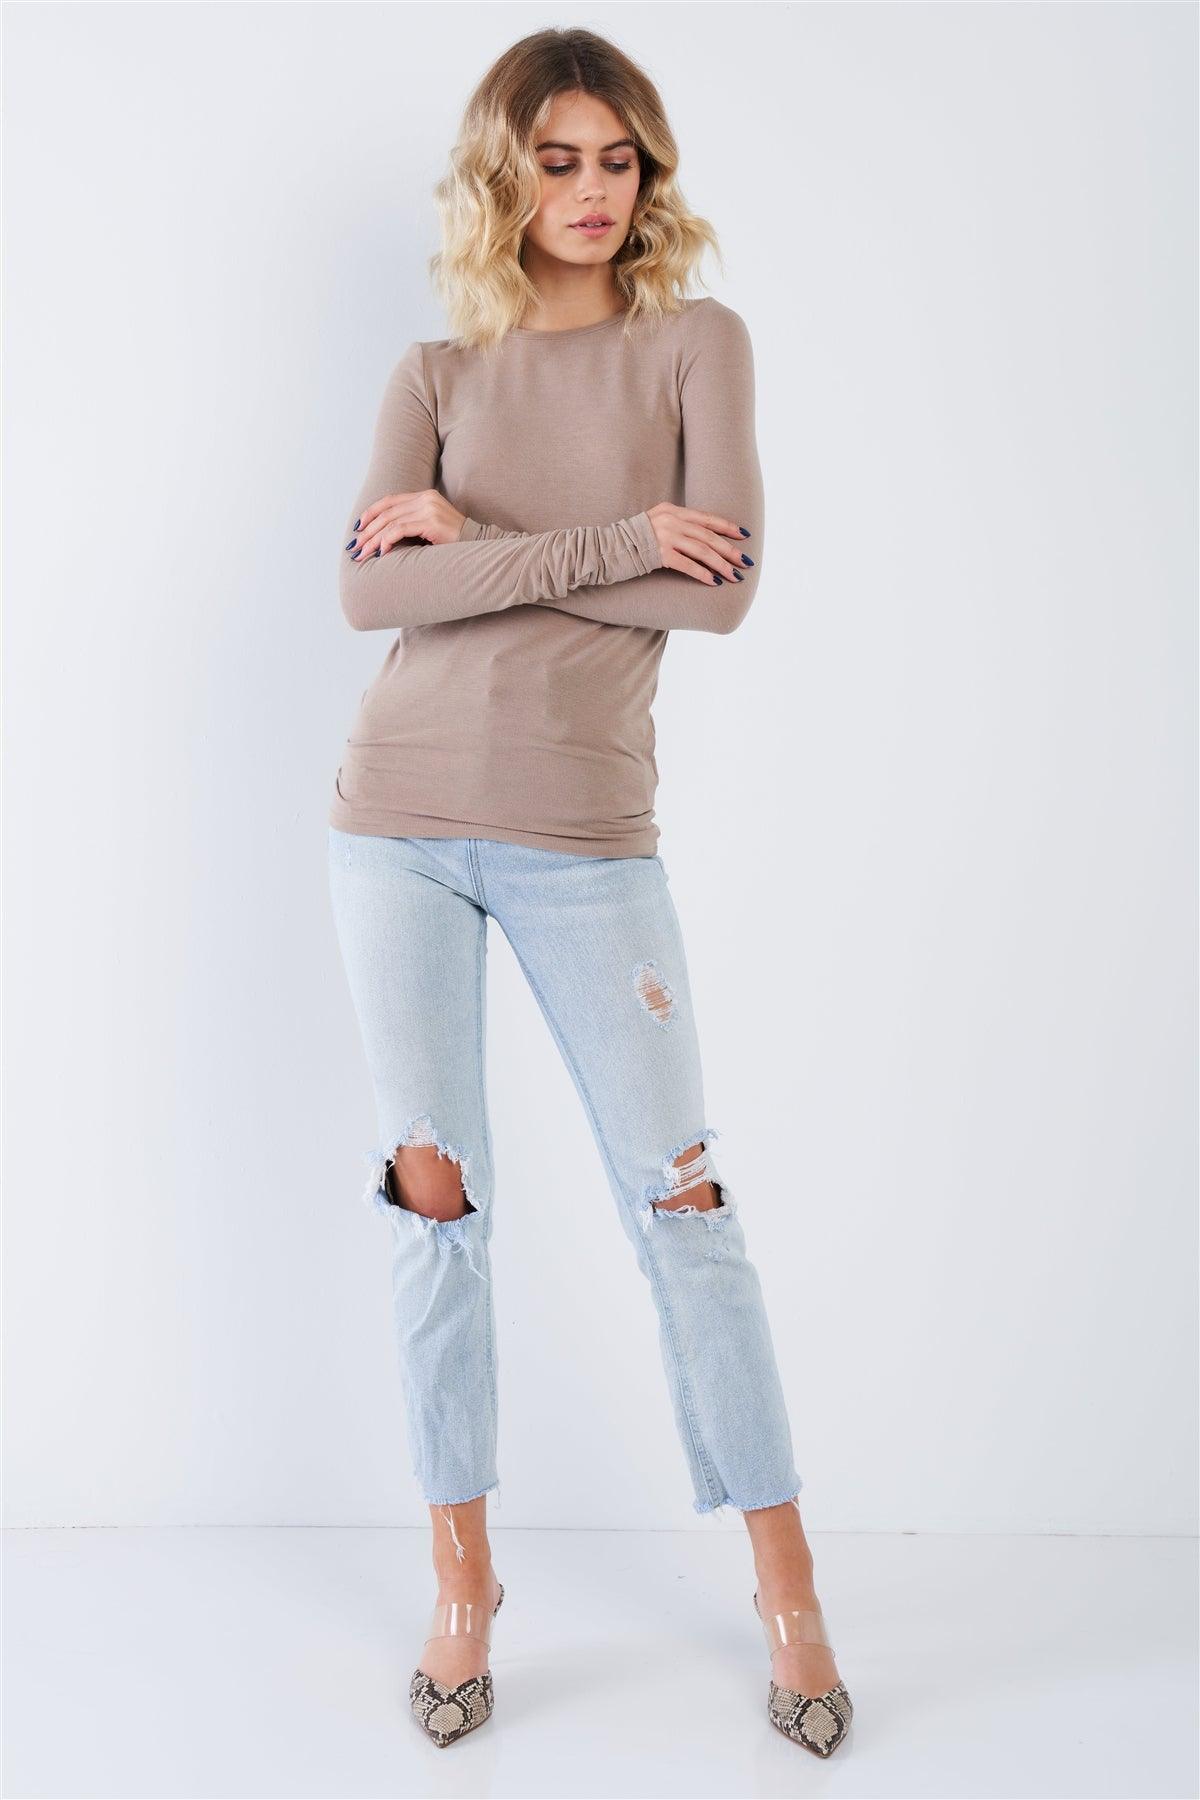 Taupe Casual Basic Long Sleeve Stretchy Bodycon Top  /3-2-1